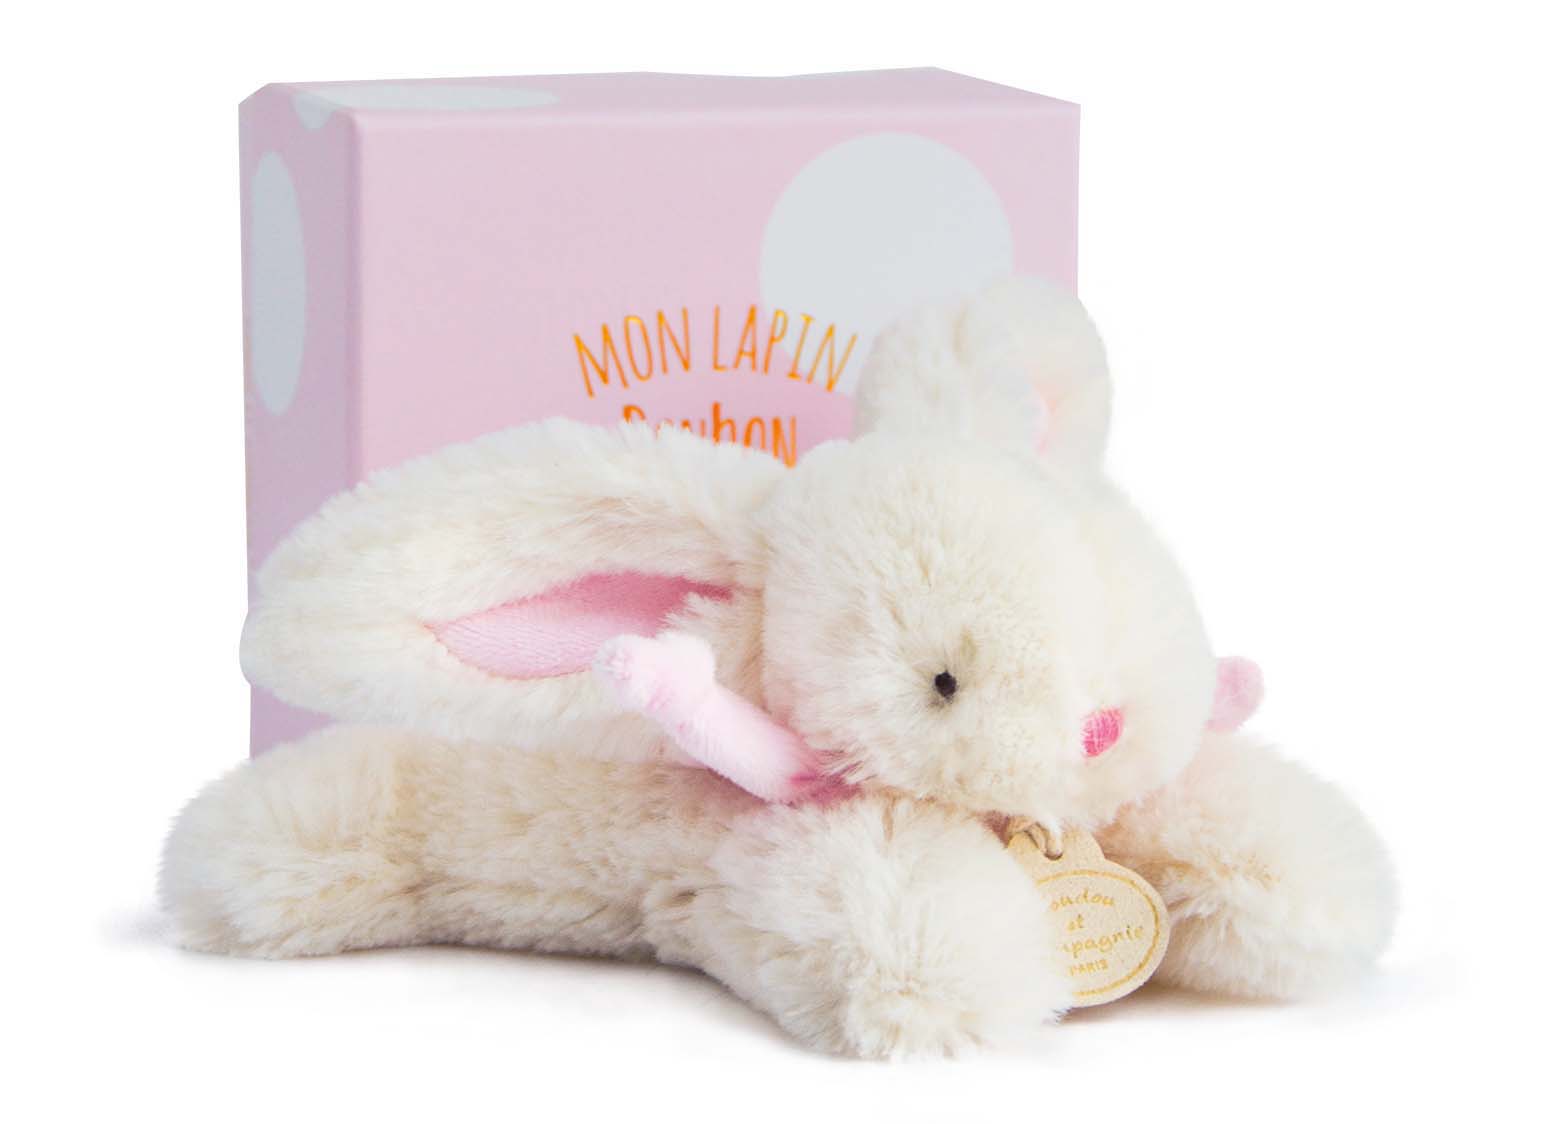 Doudou Et Compagnie - Star Bunny Music Toy - Pink - 14cm